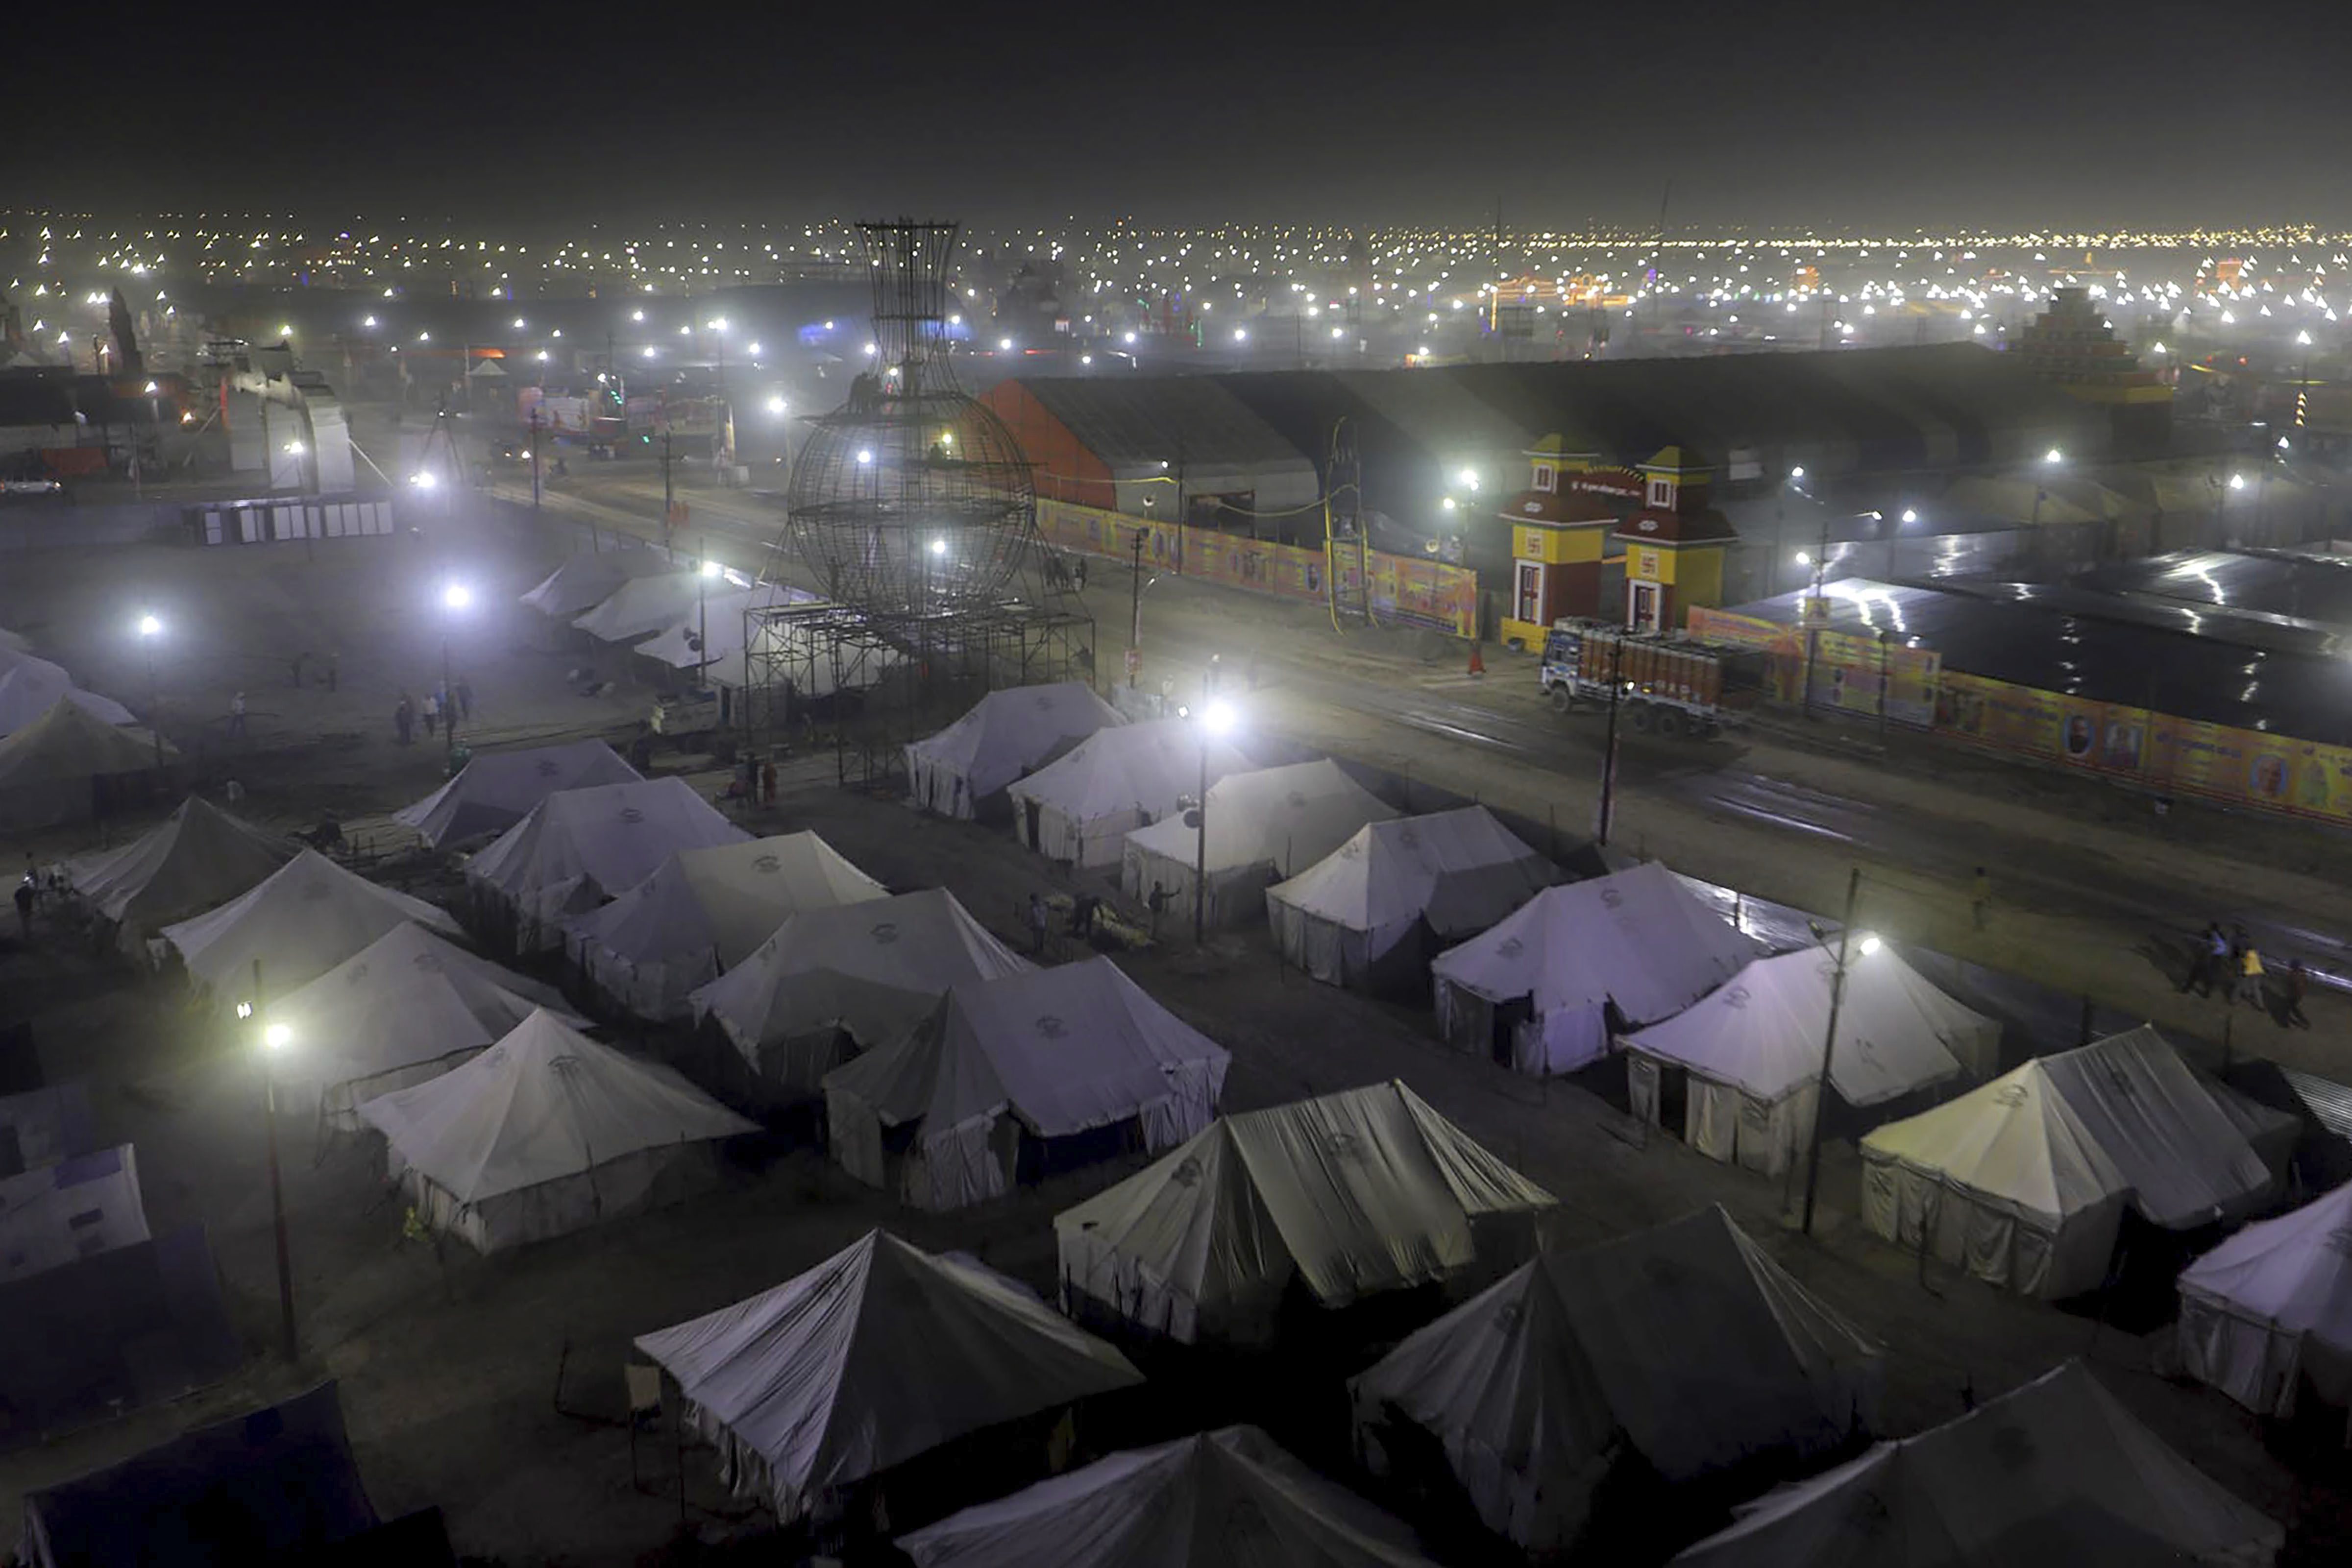 A view of the tents during 